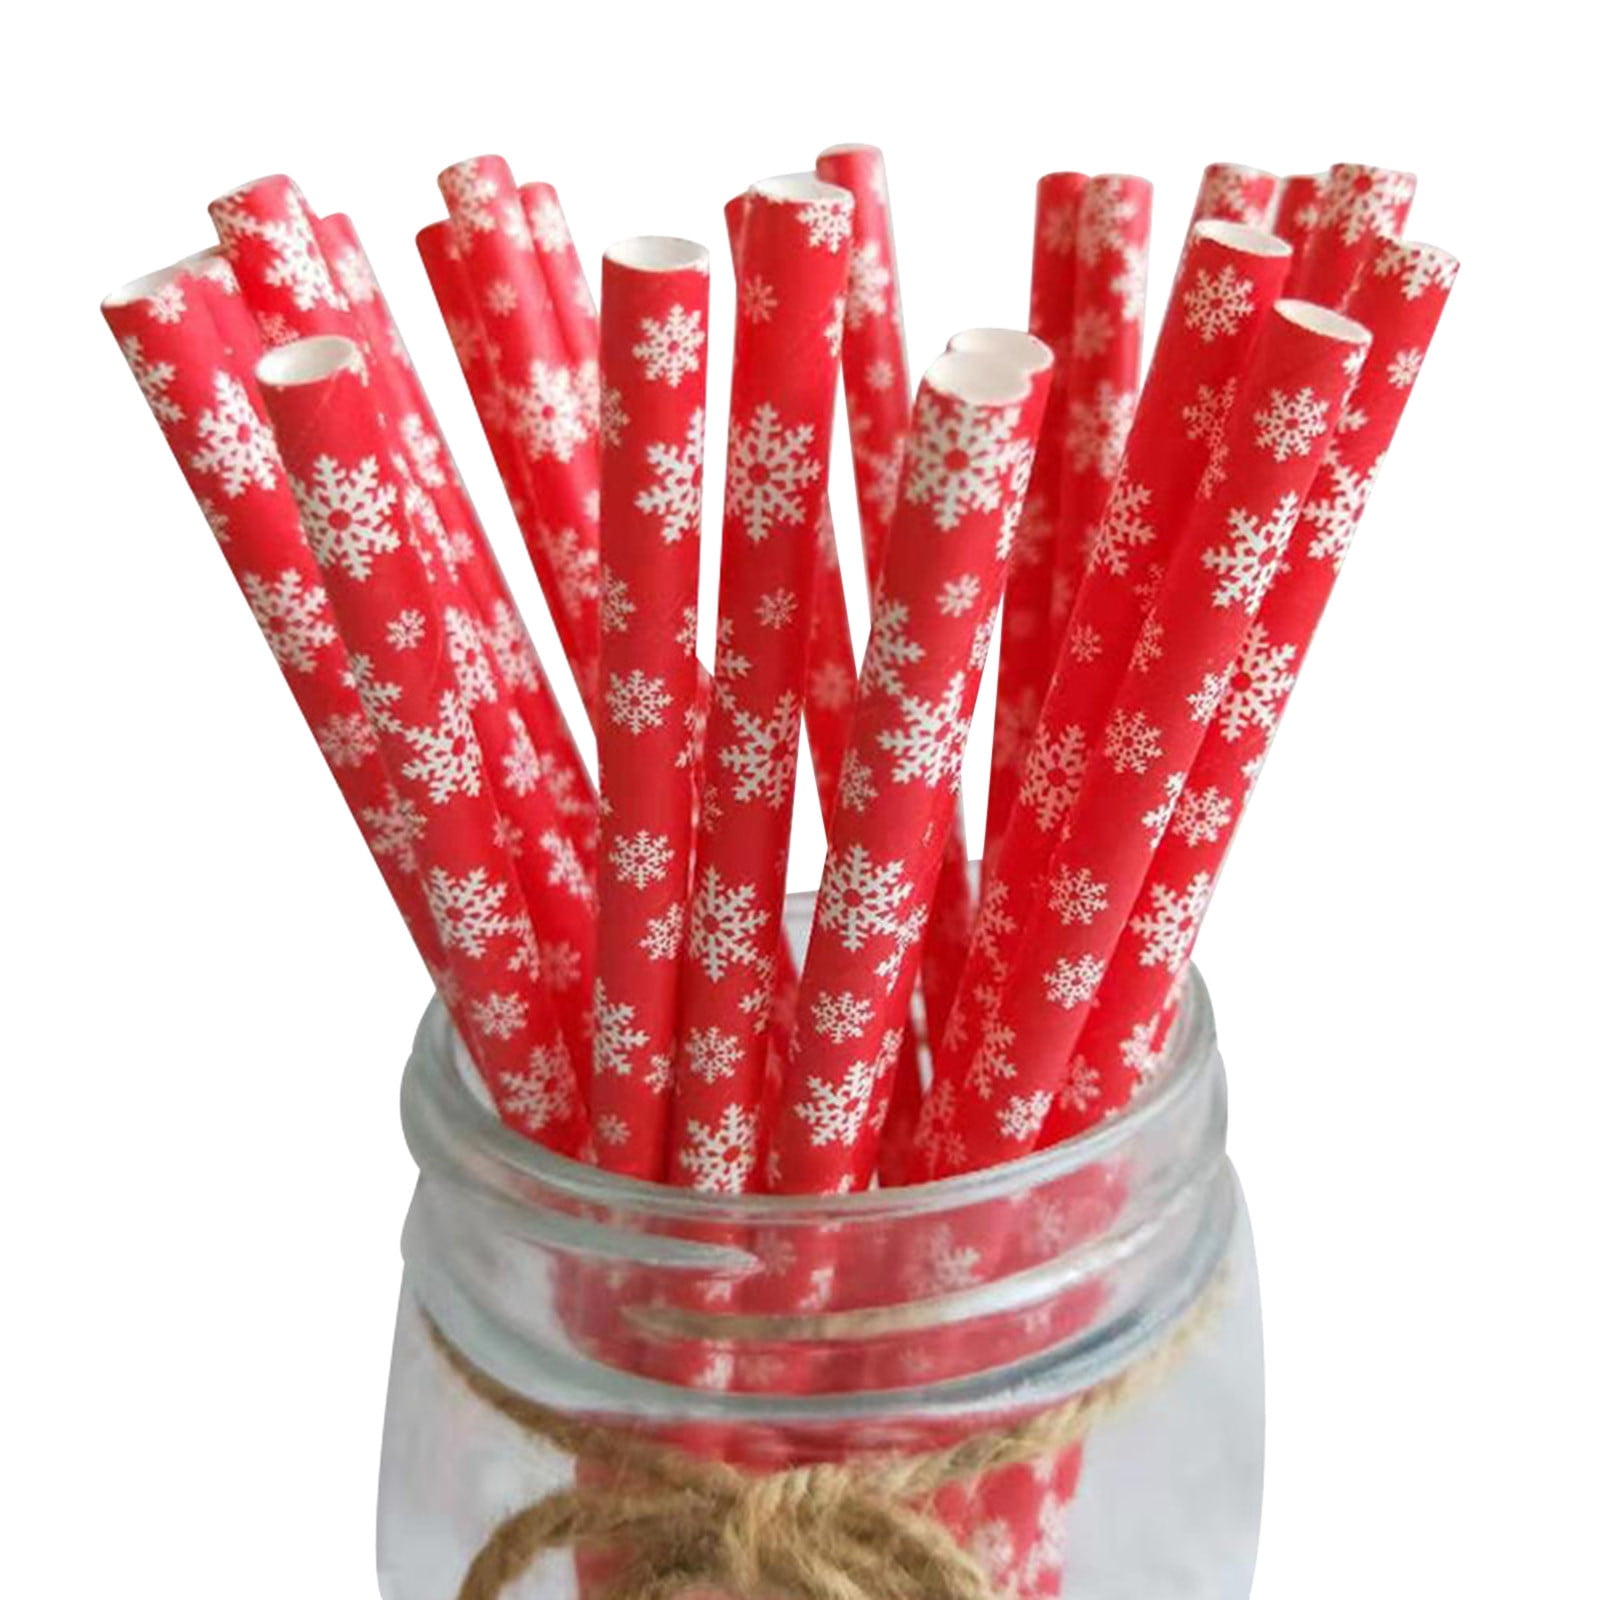 25pcs/set Christmas Paper Straws With Santa Claus And Christmas Tree Shaped  Decorations, Disposable Drinking Straws For Party